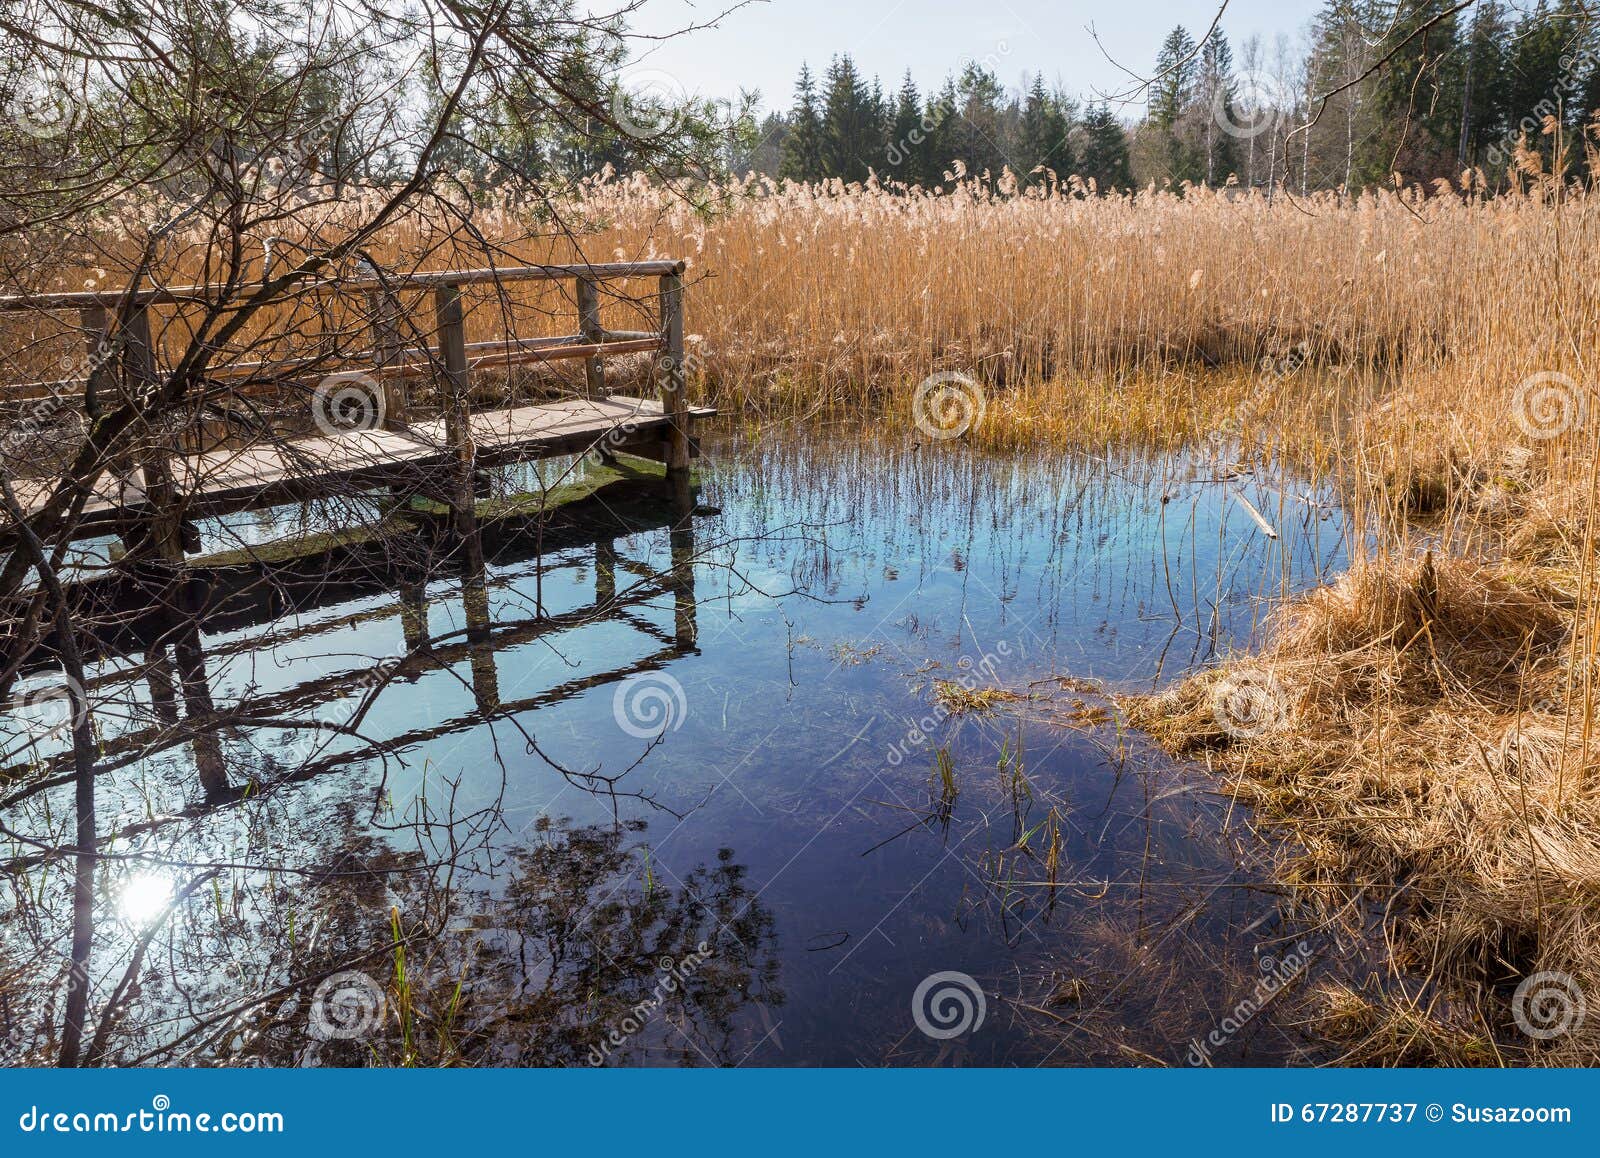 blue fount in the swamp, tourist attraction osterseen